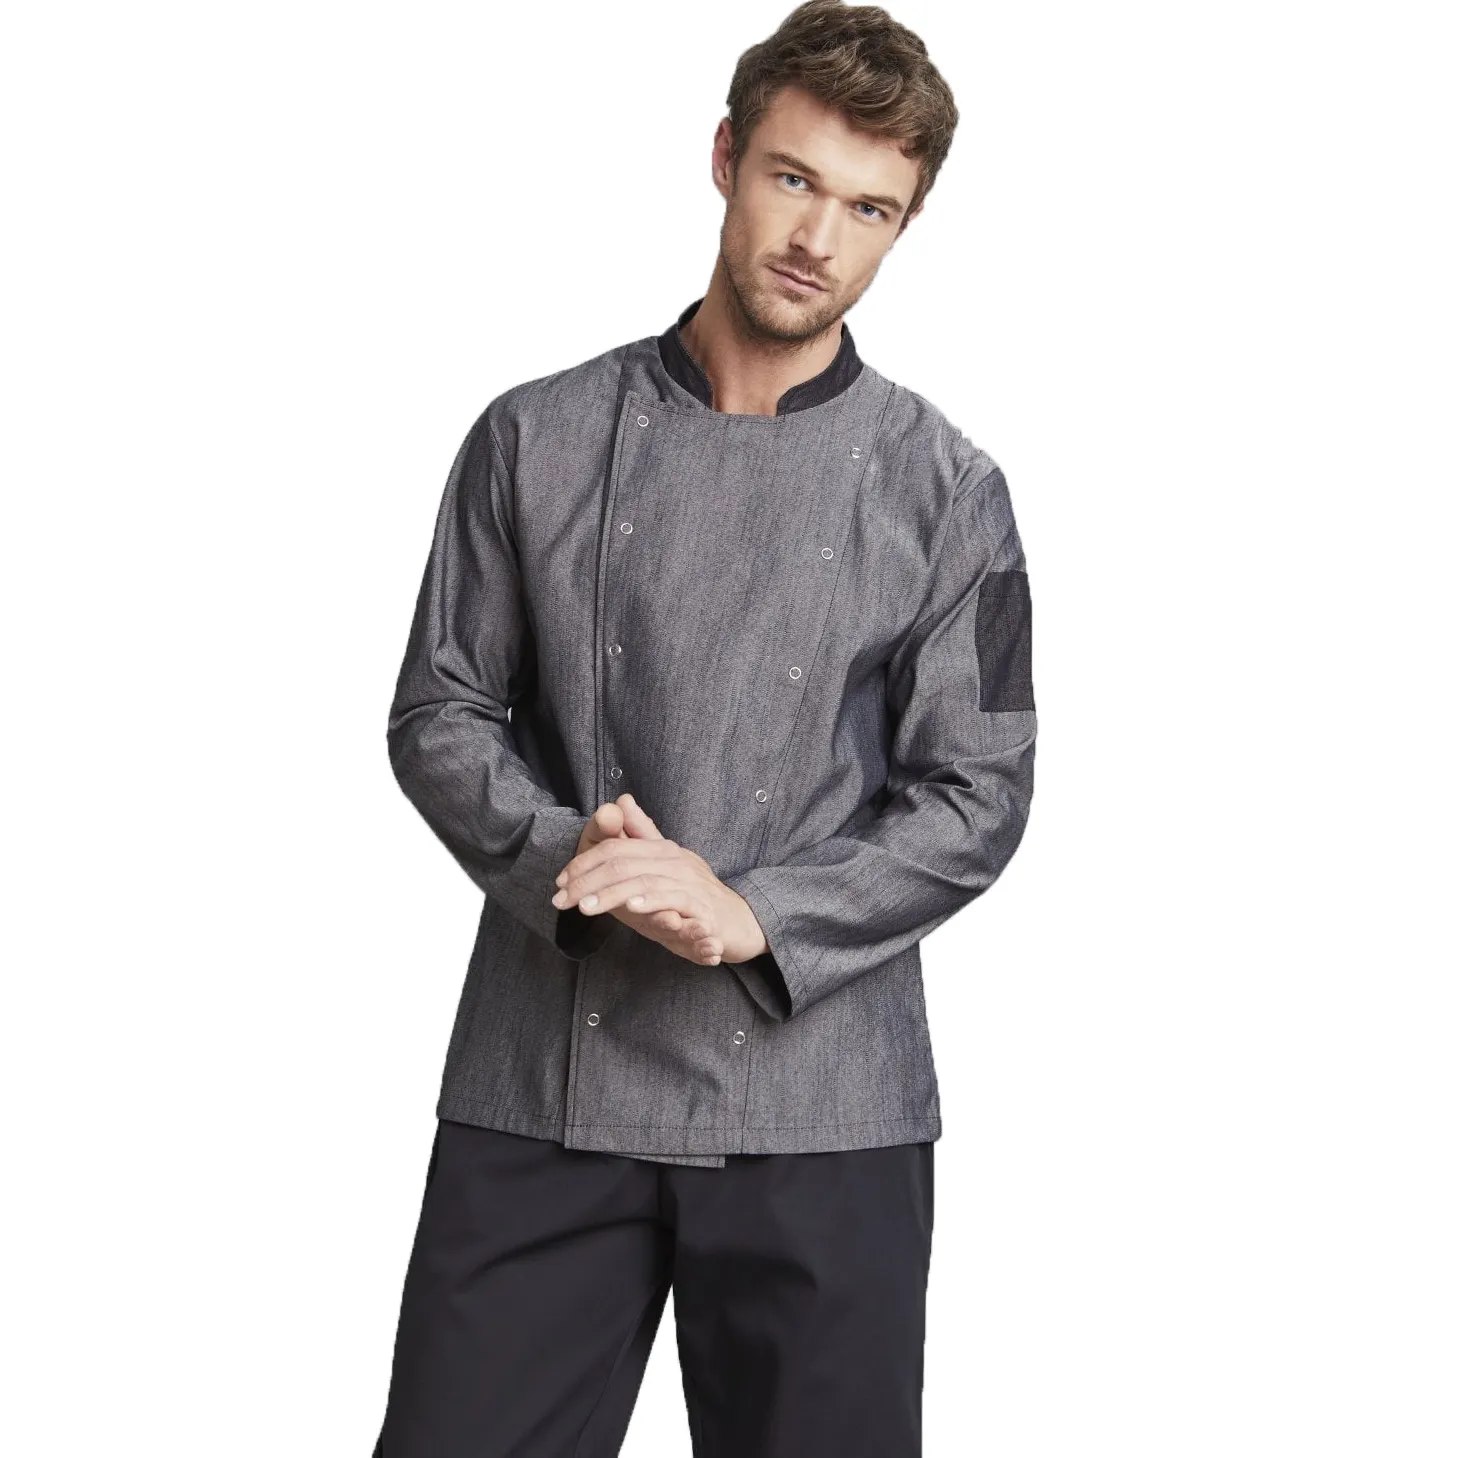 Produce high quality chef uniform stand collar double breasted unisex long sleeve chef coat jacket